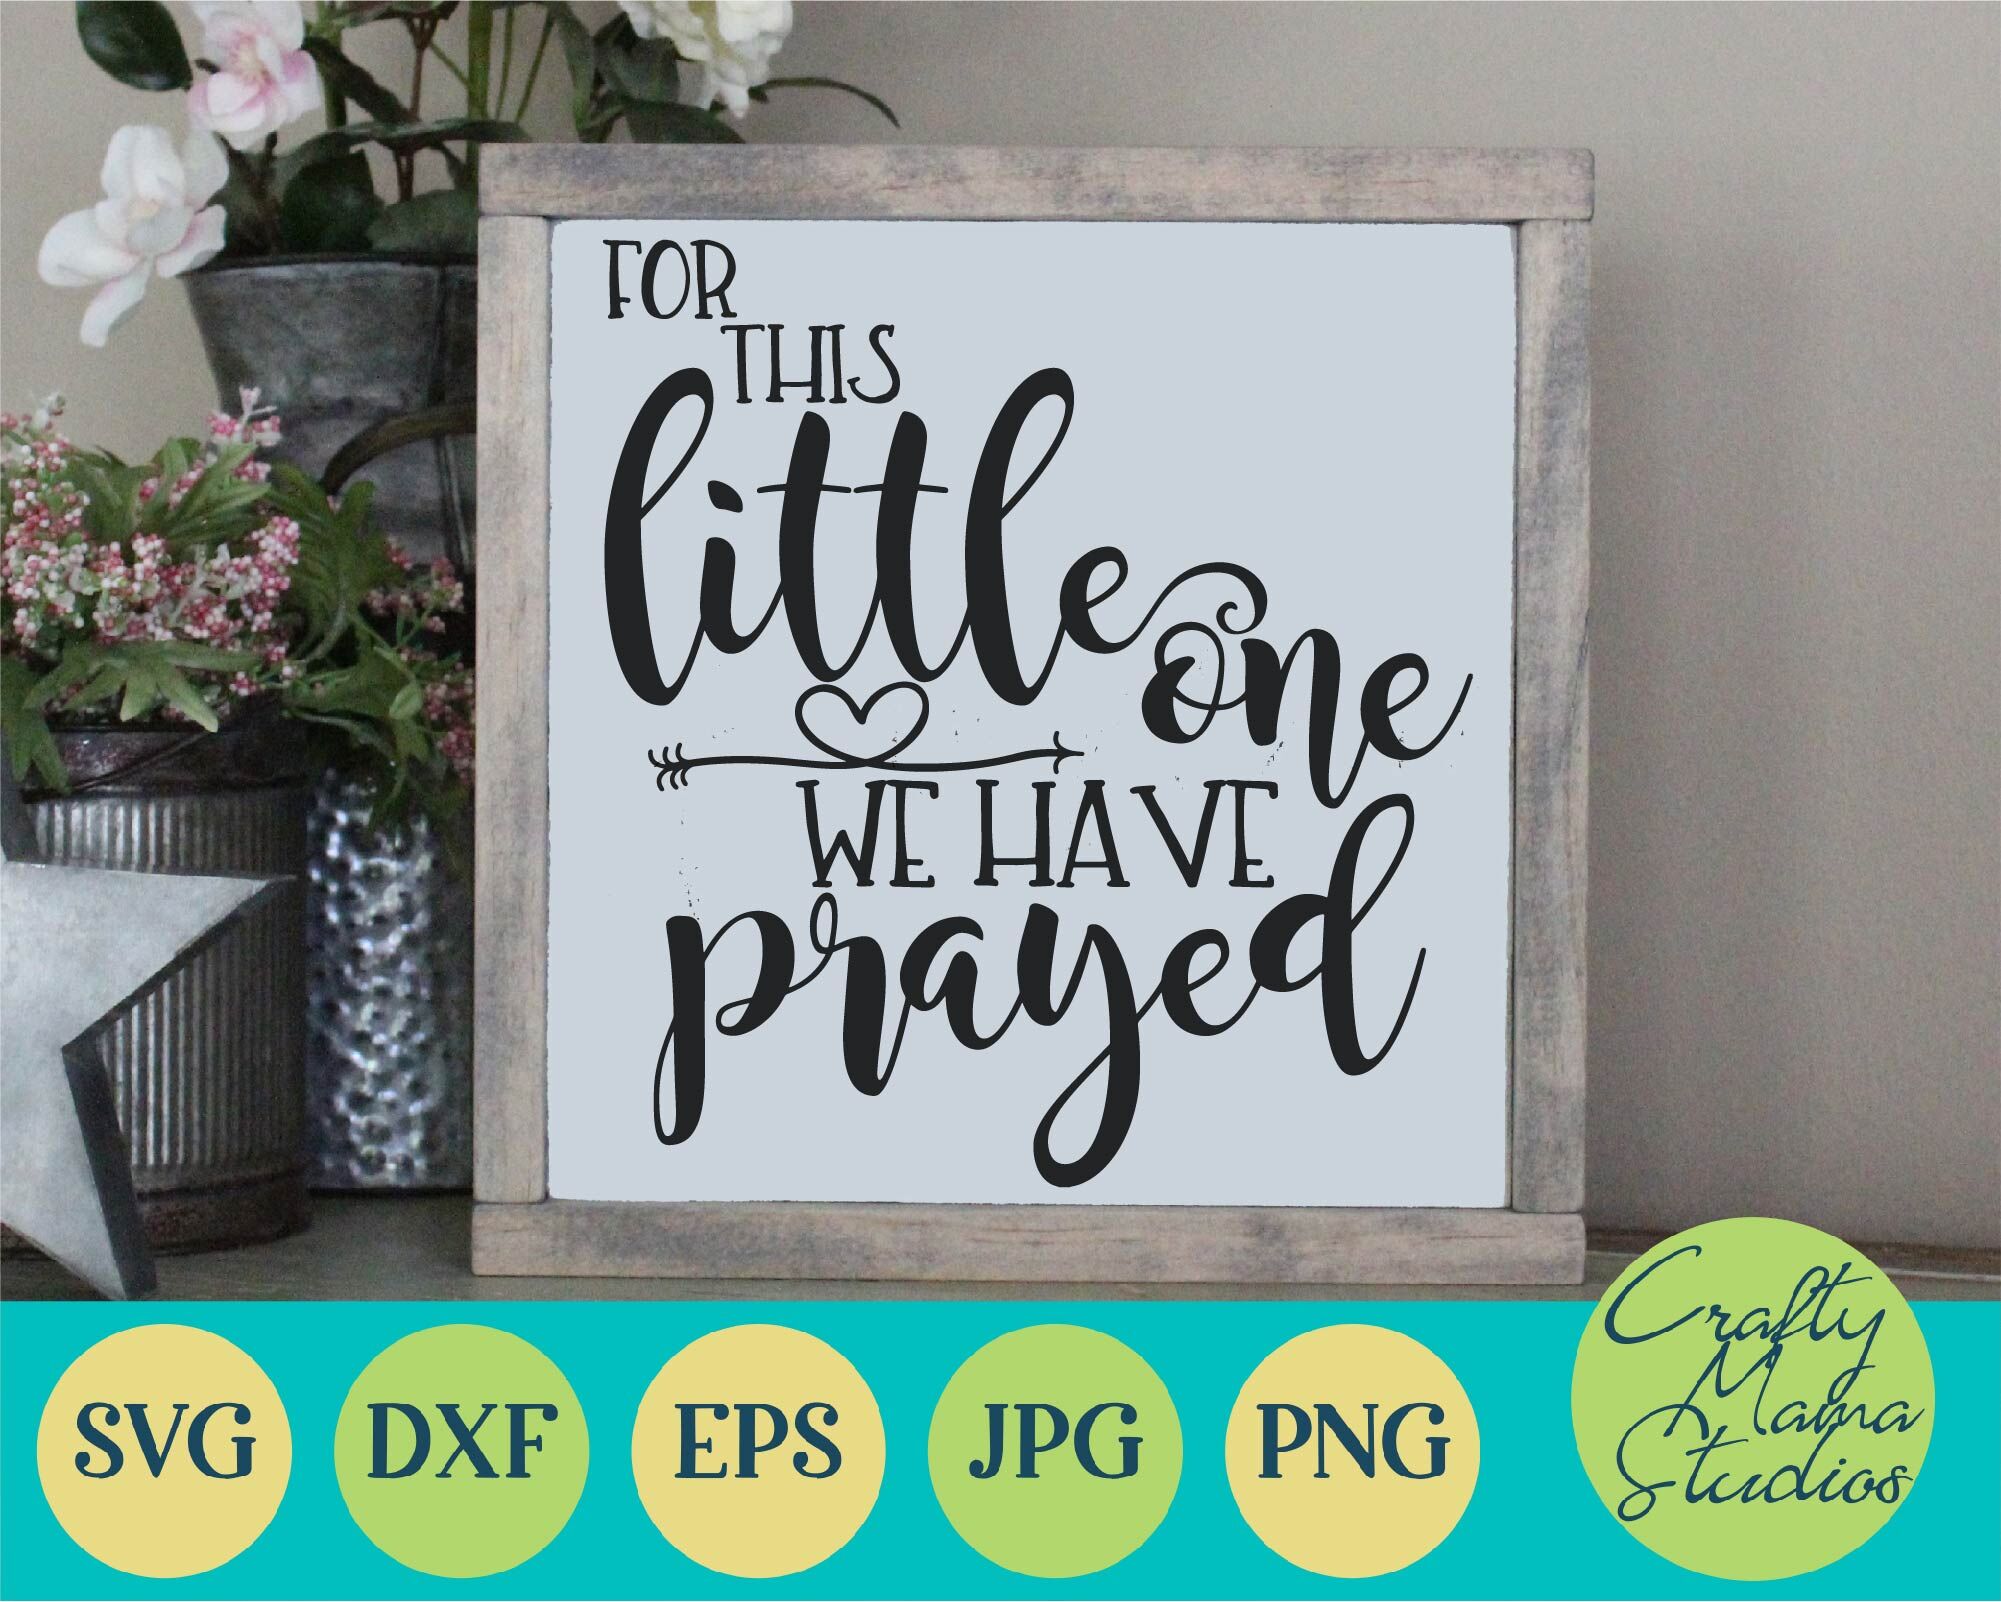 For This Little One We Prayed Svg By Crafty Mama Studios Thehungryjpeg Com